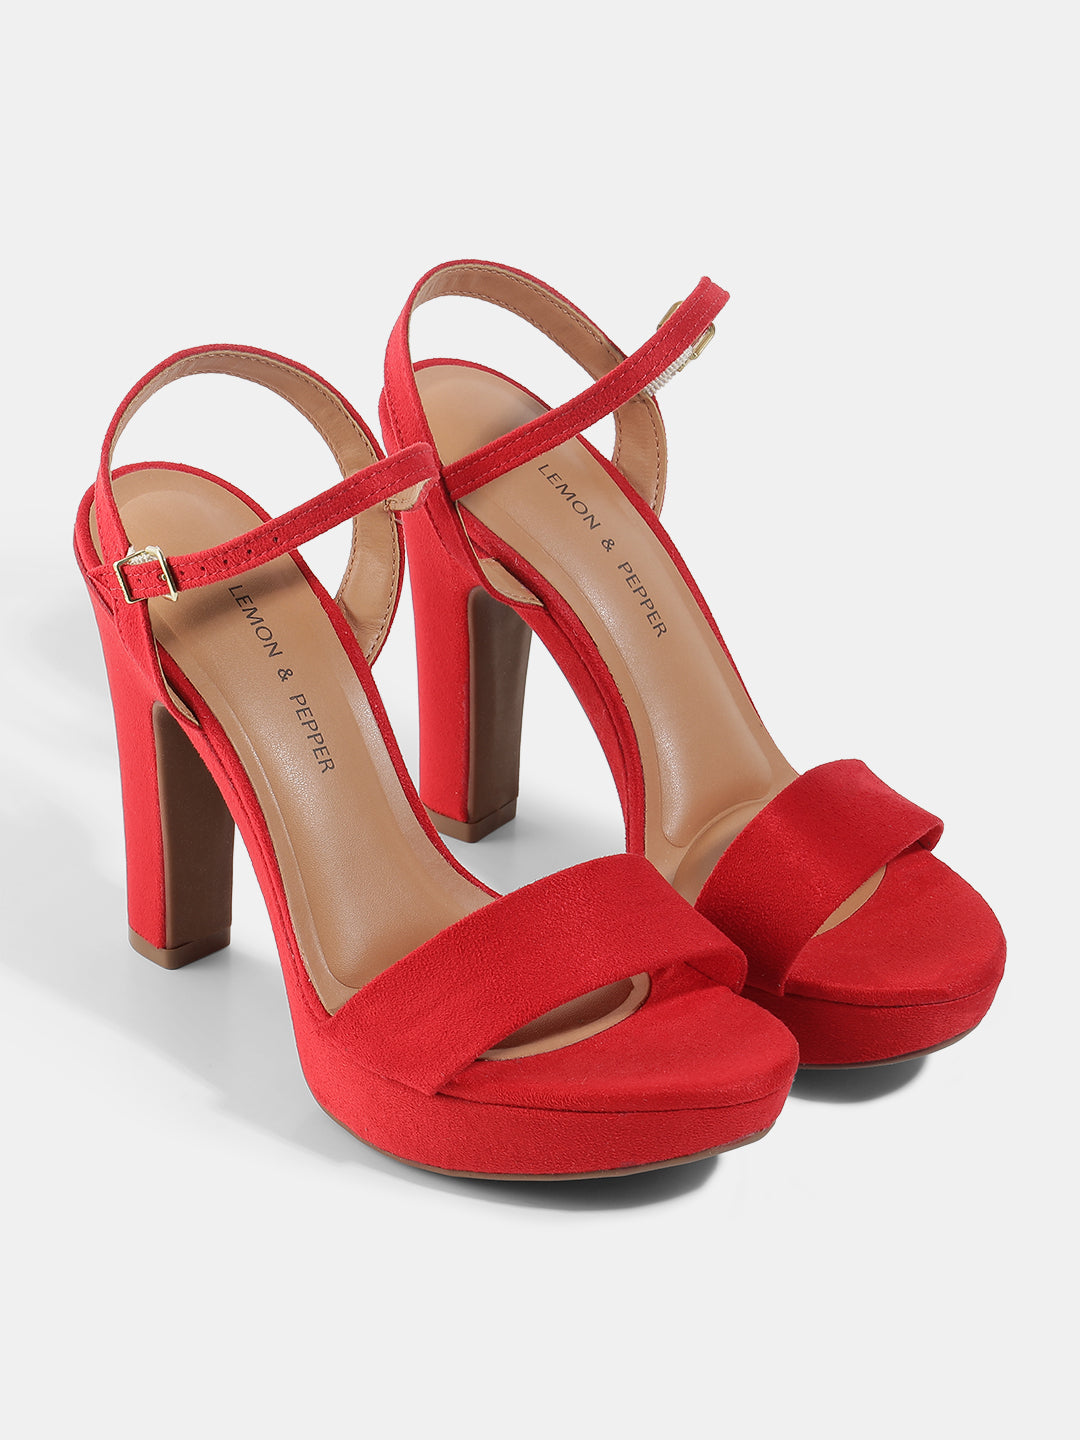 CARLTON LONDON CLL-4444 Womens Synthetic Heel Sandals (Red) in Pune at best  price by New Omega Ladies Footwear - Justdial